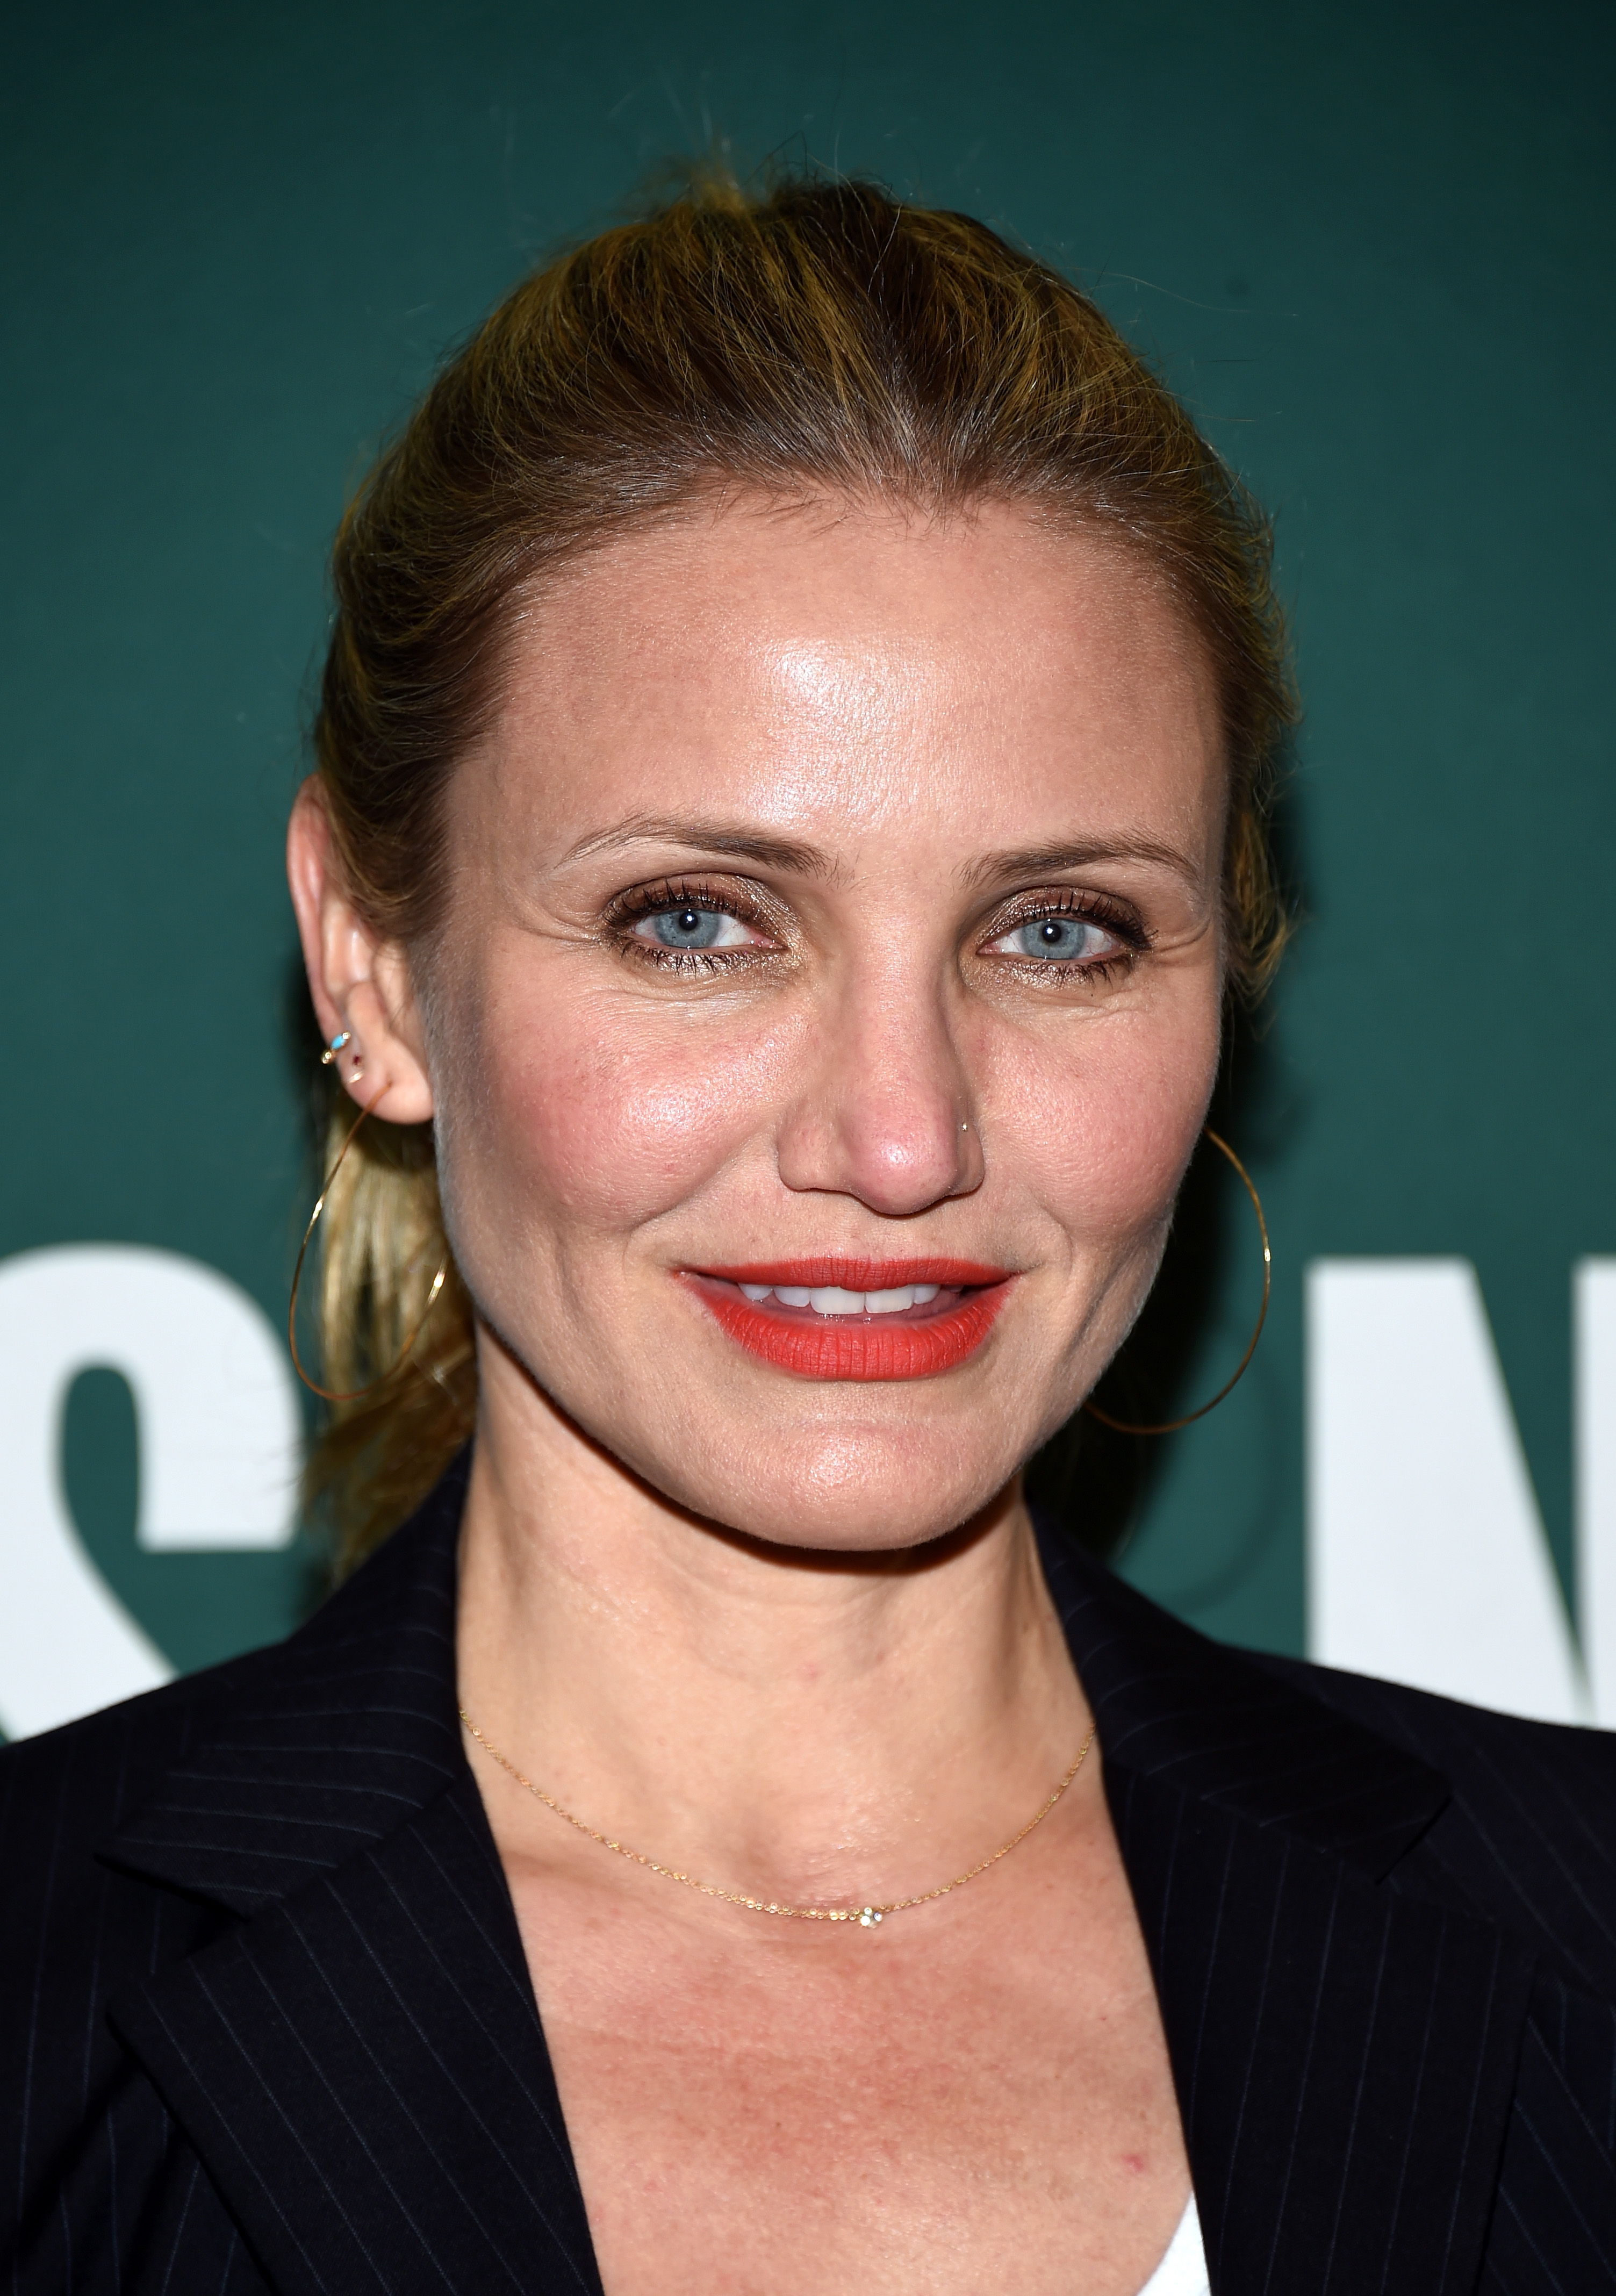 Cameron Diaz during a book signing on April 13, 2016 in Los Angeles, California | Source: Getty Images